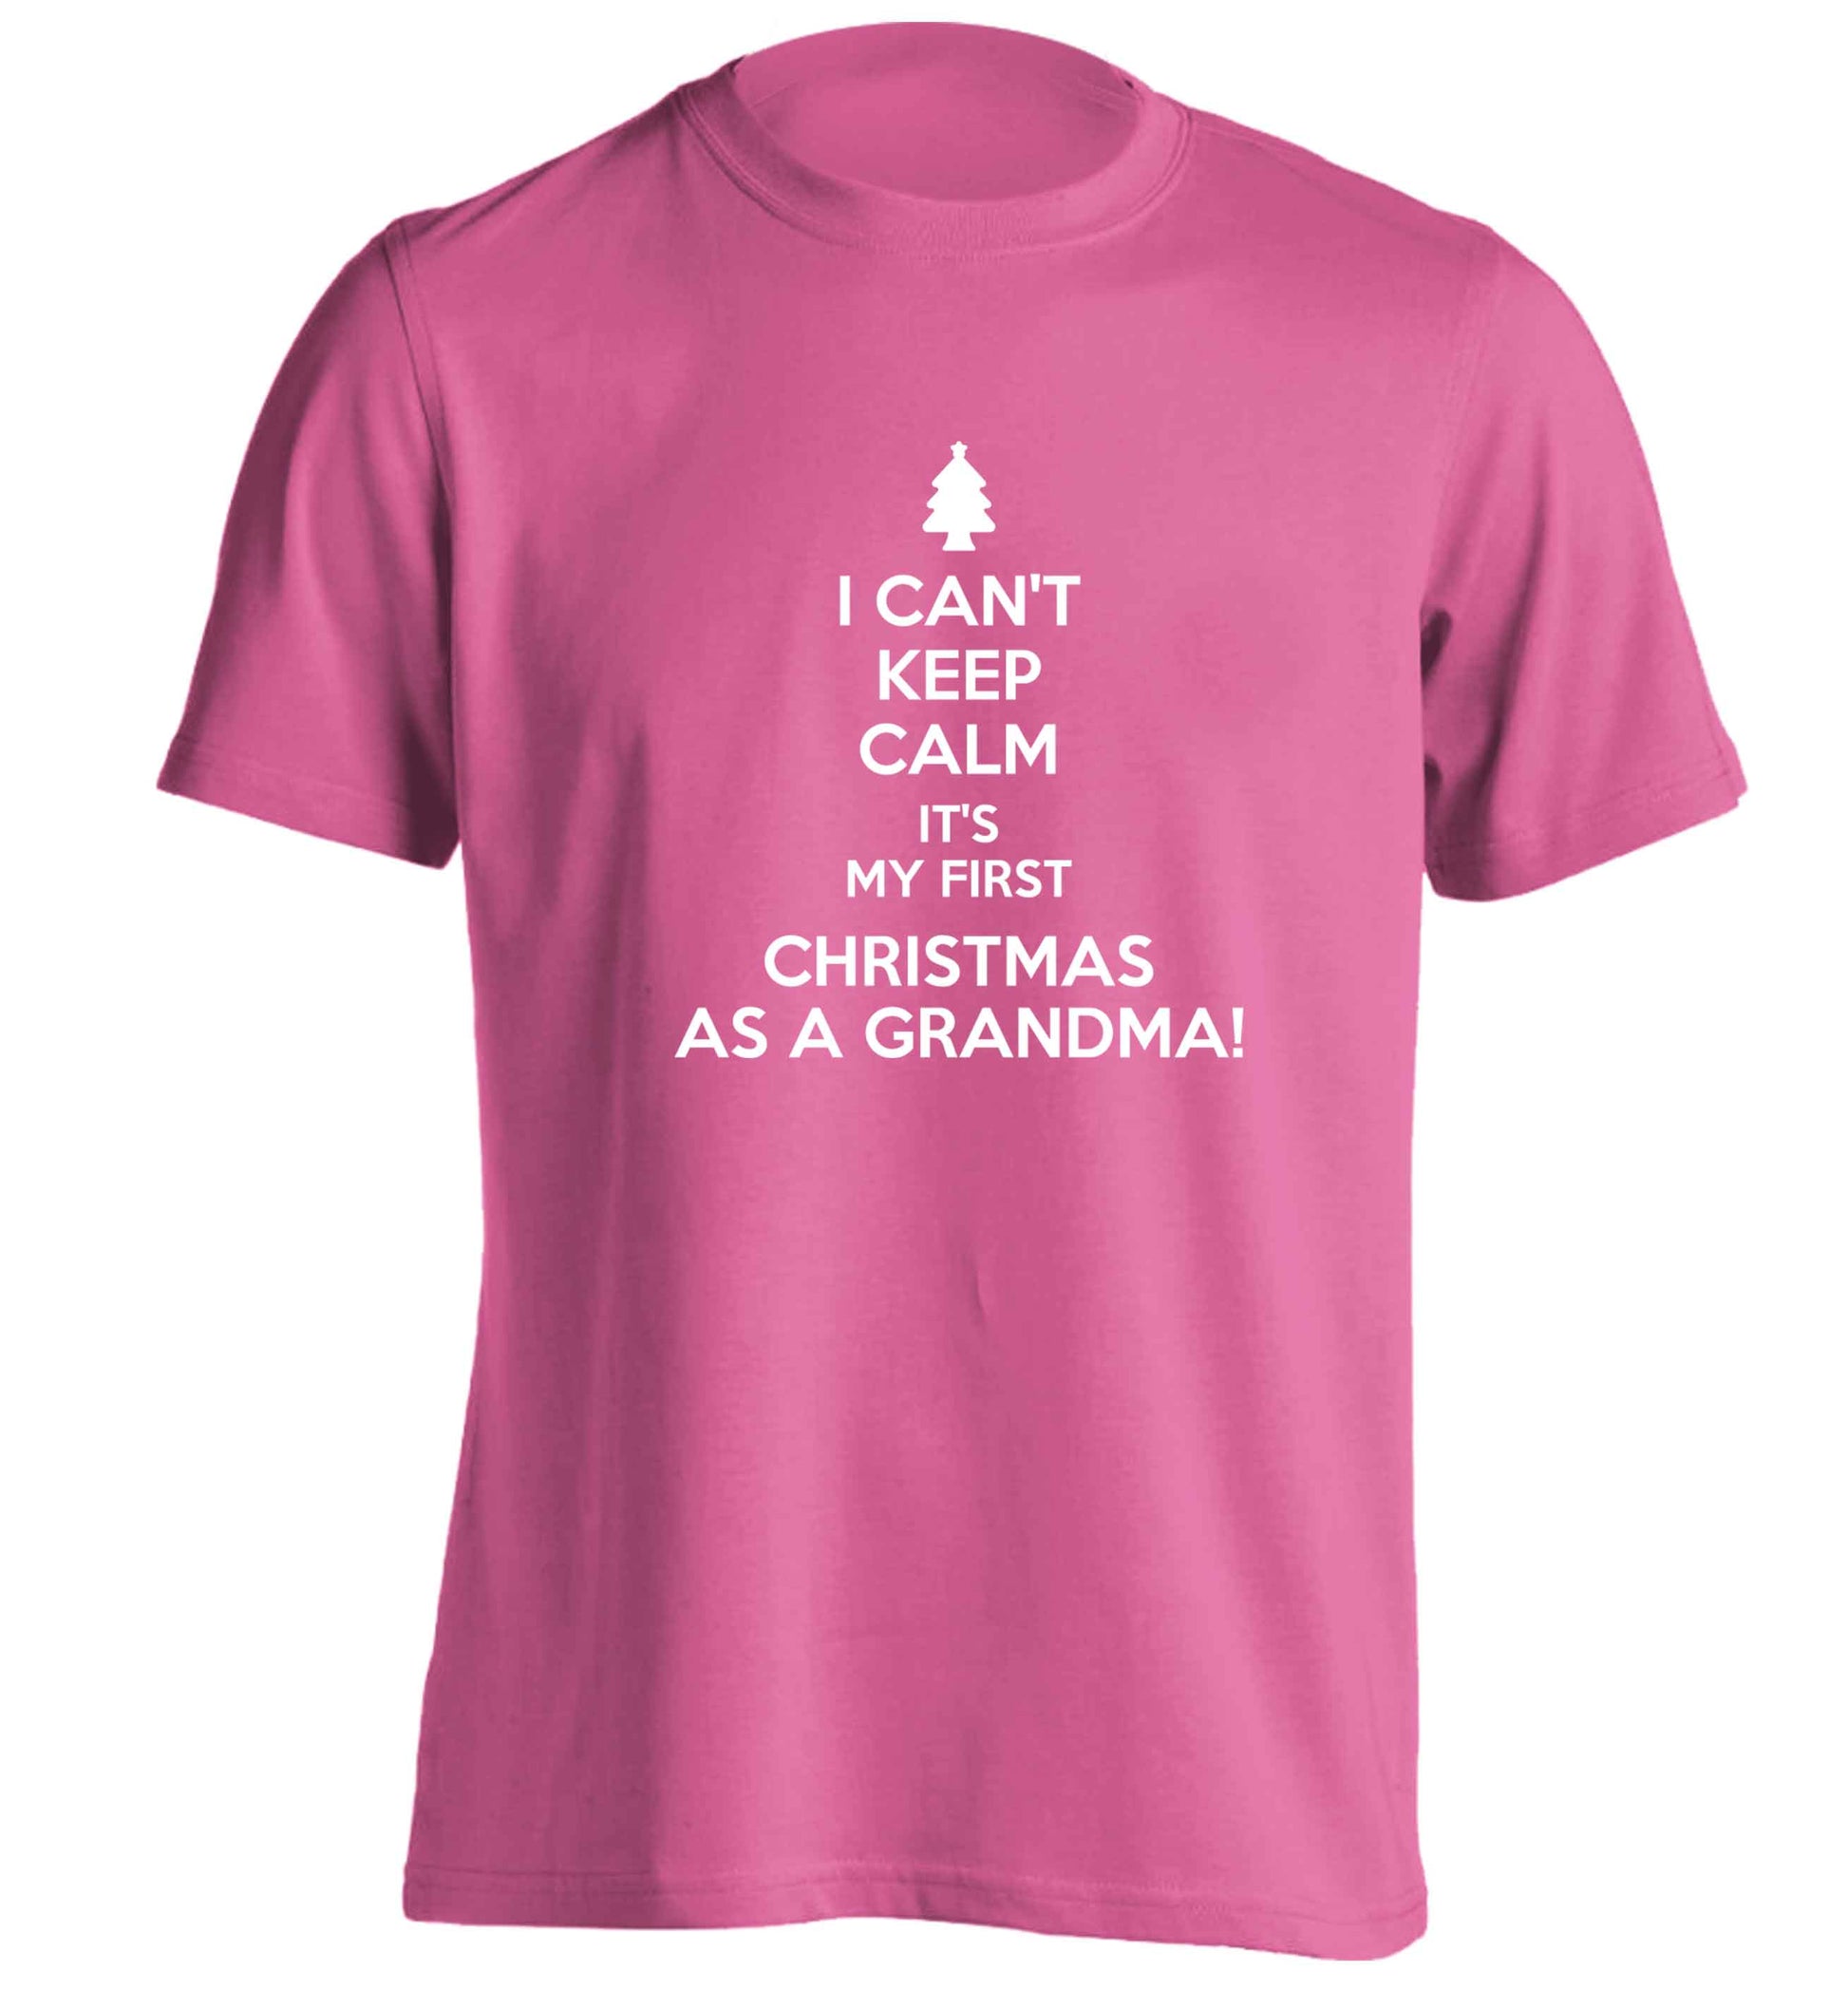 I can't keep calm it's my first Christmas as a grandma! adults unisex pink Tshirt 2XL